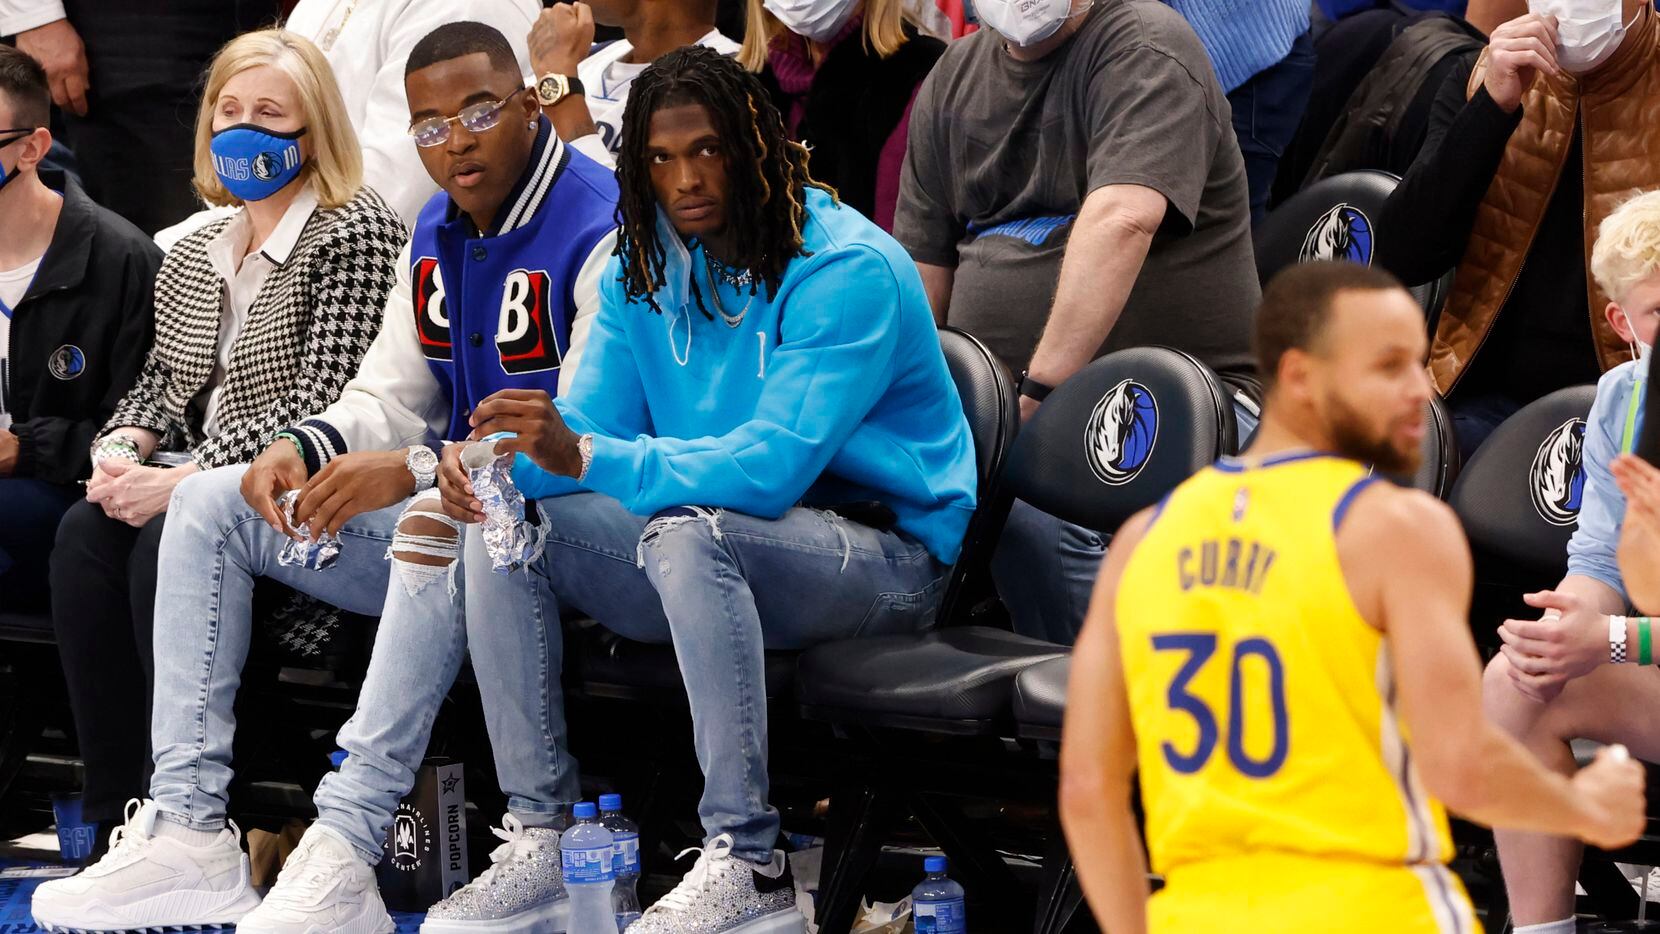 Dallas Cowboys wide receivers Amari Cooper and CeeDee Lamb, along with LA Dodgers Clayton Kershaw watch a game between the Dallas Mavericks and Golden State Warriors at American Airlines Center on Wednesday, January 5, 2022, in Dallas.